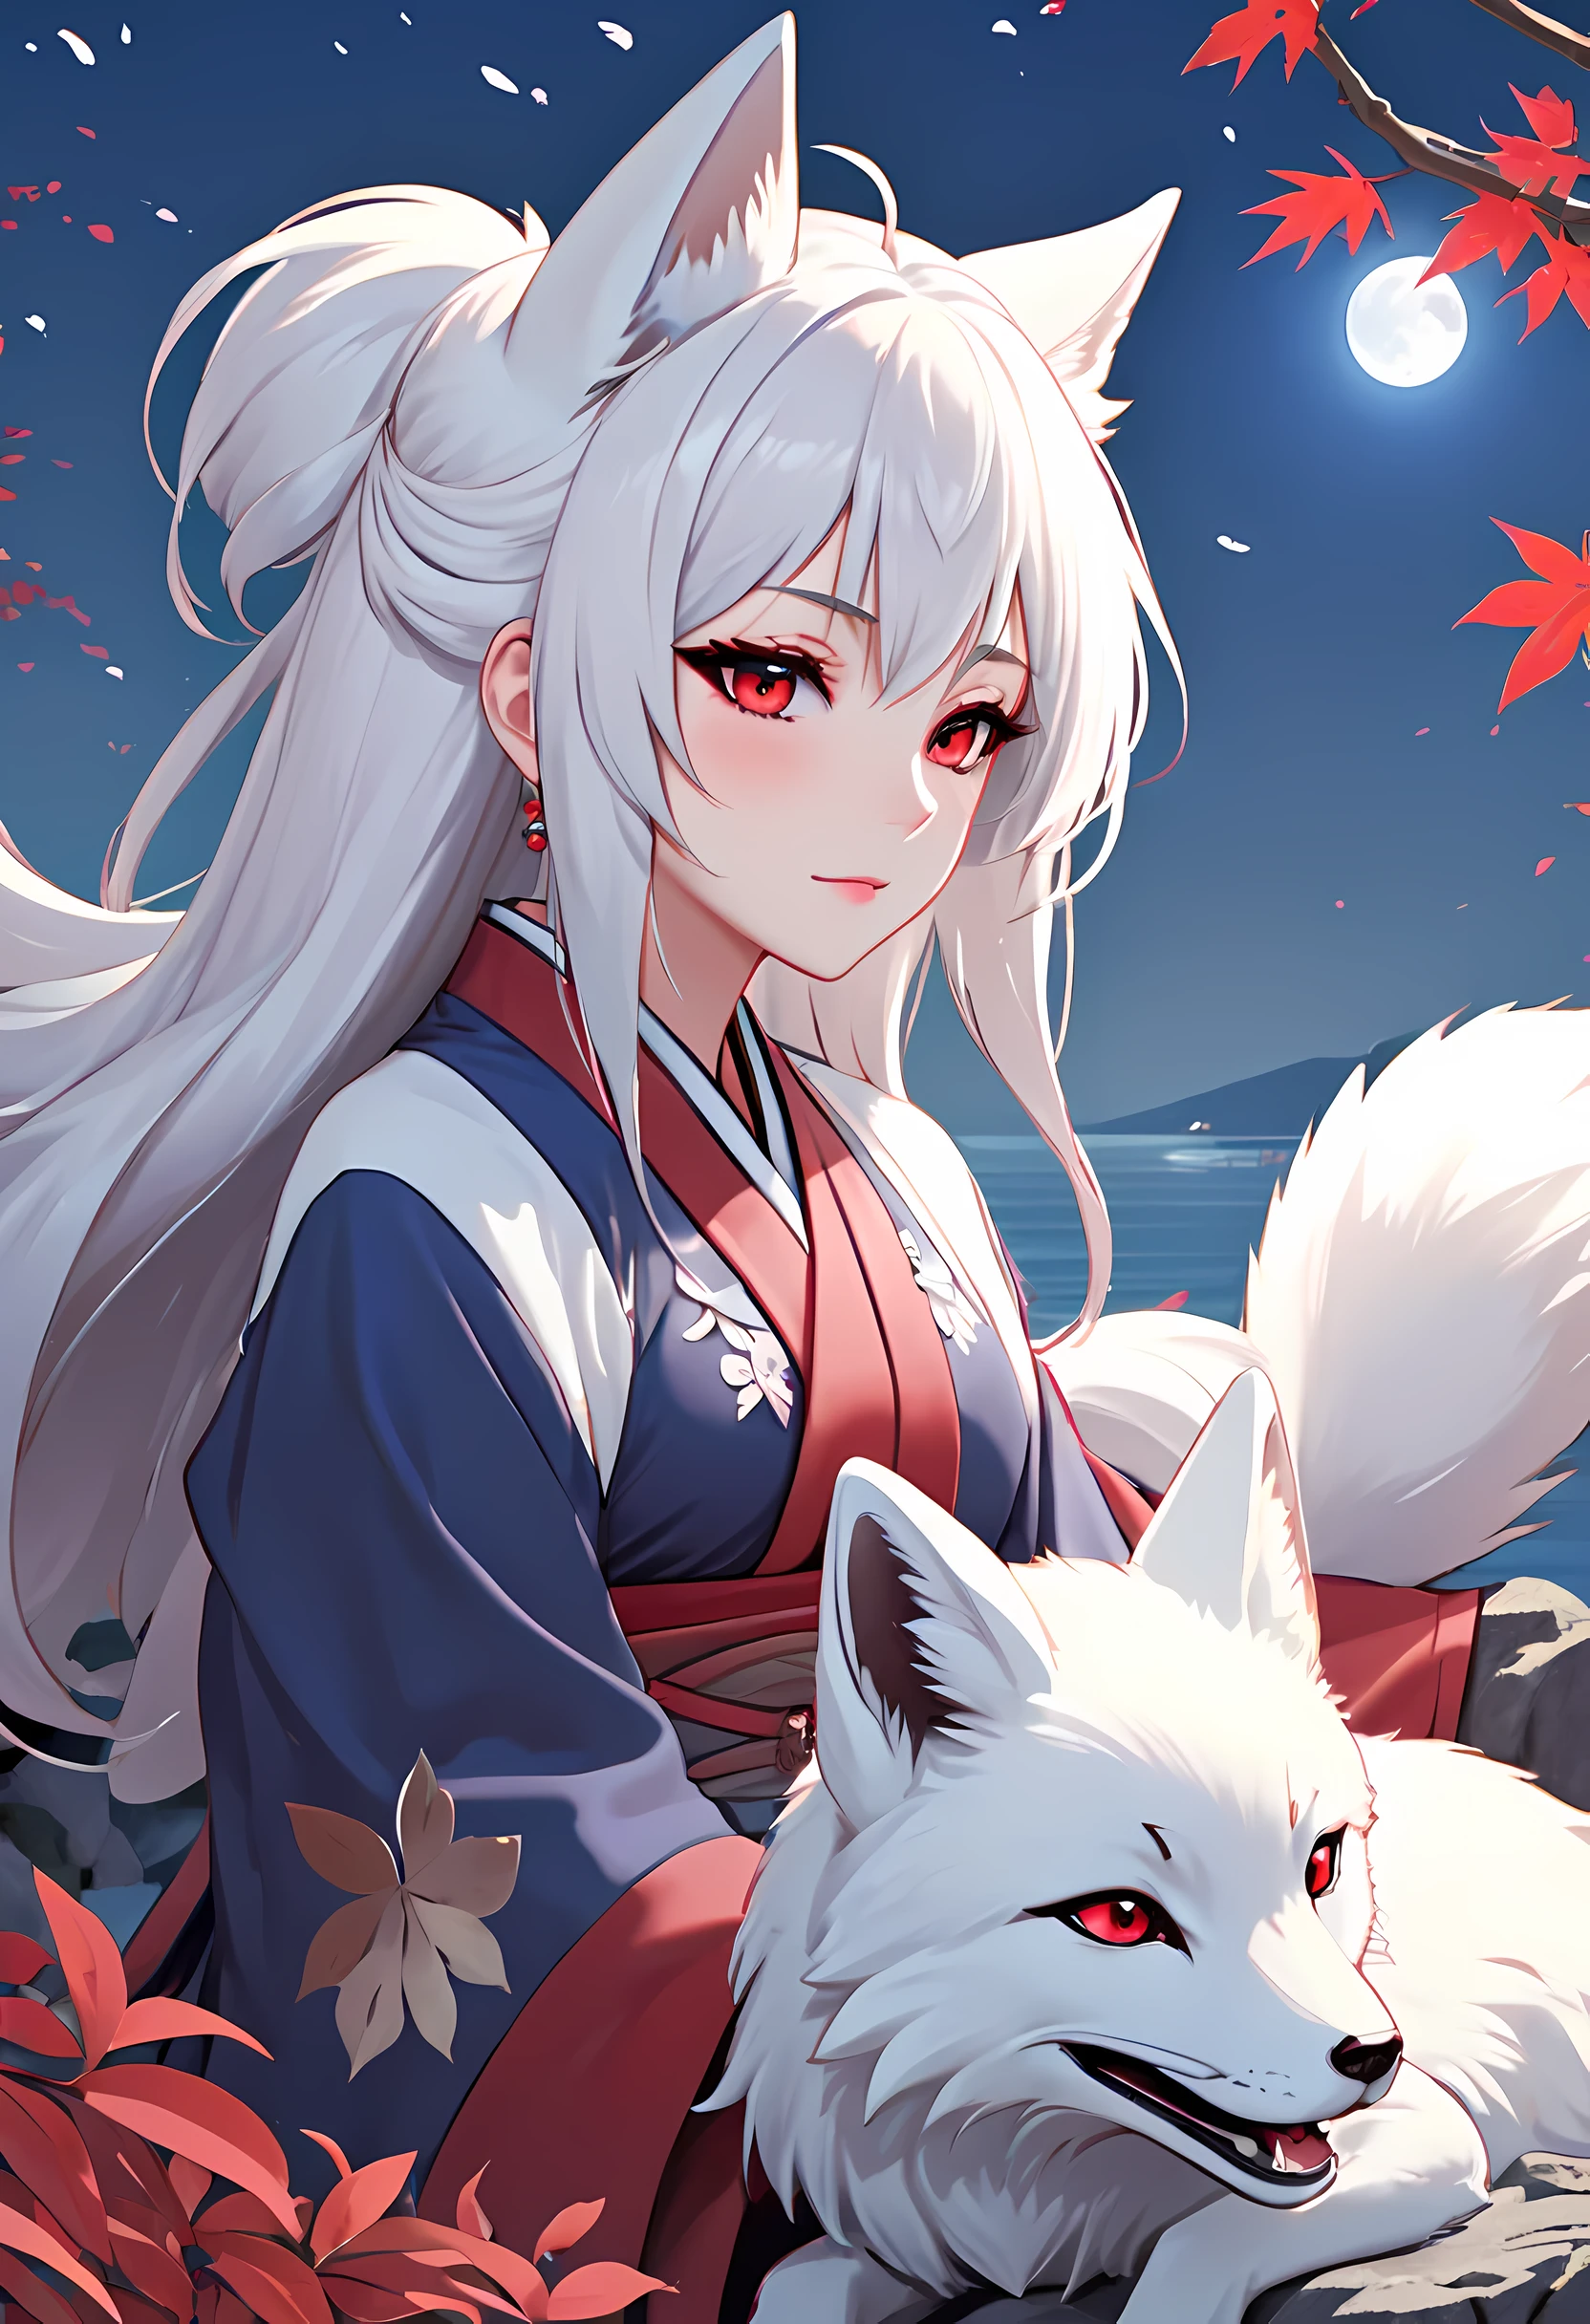 (better quality,masterpiece,high detailed),(perfect face:1.5),anime girl sitting on a rock with a huge crescent moon in the background, sleeping white - haired fox,lake,(bright eyes:1.5),(red leaves:1.4),(detailed wafuku:1.2),medium shot,anime art wallpaper 8 k, anime art wallpaper 4k, anime style 4 k, kitsune, onmyoji detailed art, anime wallpaper 4 k,a beautiful fox lady, fox nobushi, onmyoji detailed art, white haired deity,  white fox anime,